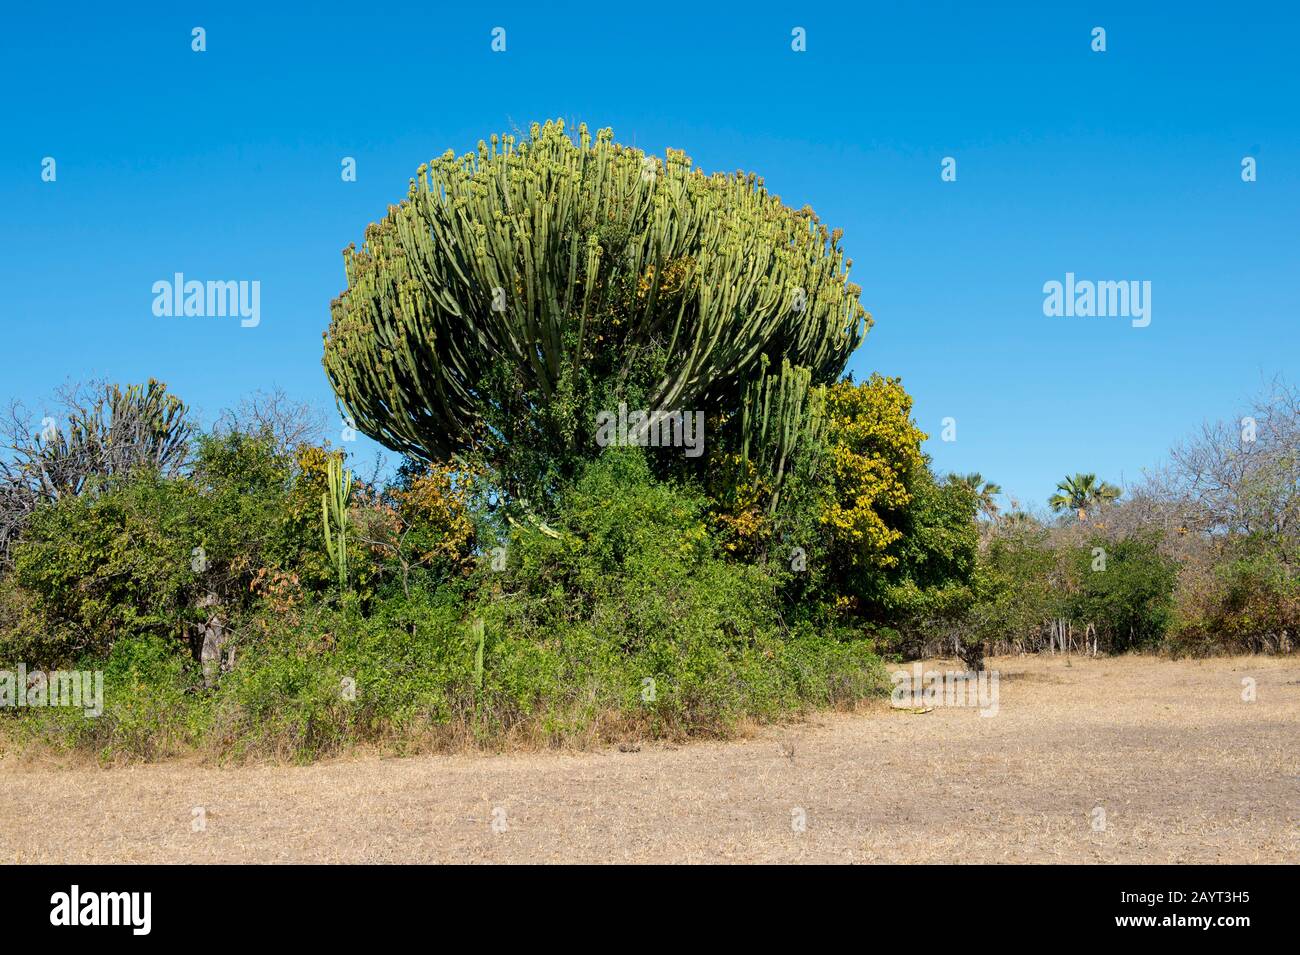 A large candelabra tree in Liwonde National Park, Malawi. Stock Photo